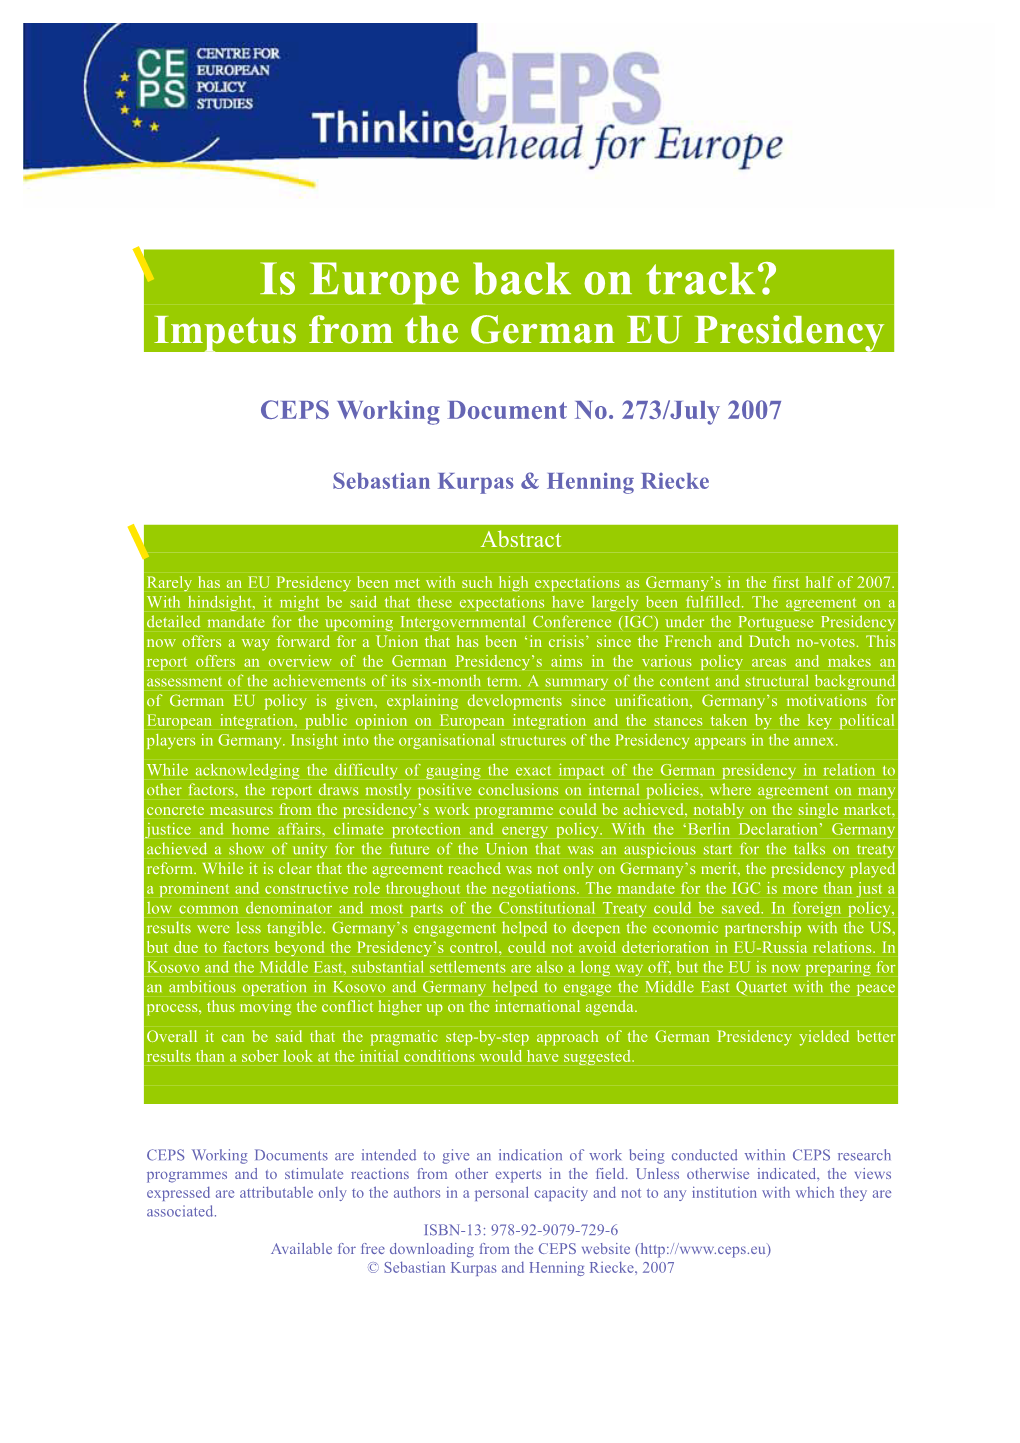 Is Europe Back on Track? Impetus from the German EU Presidency